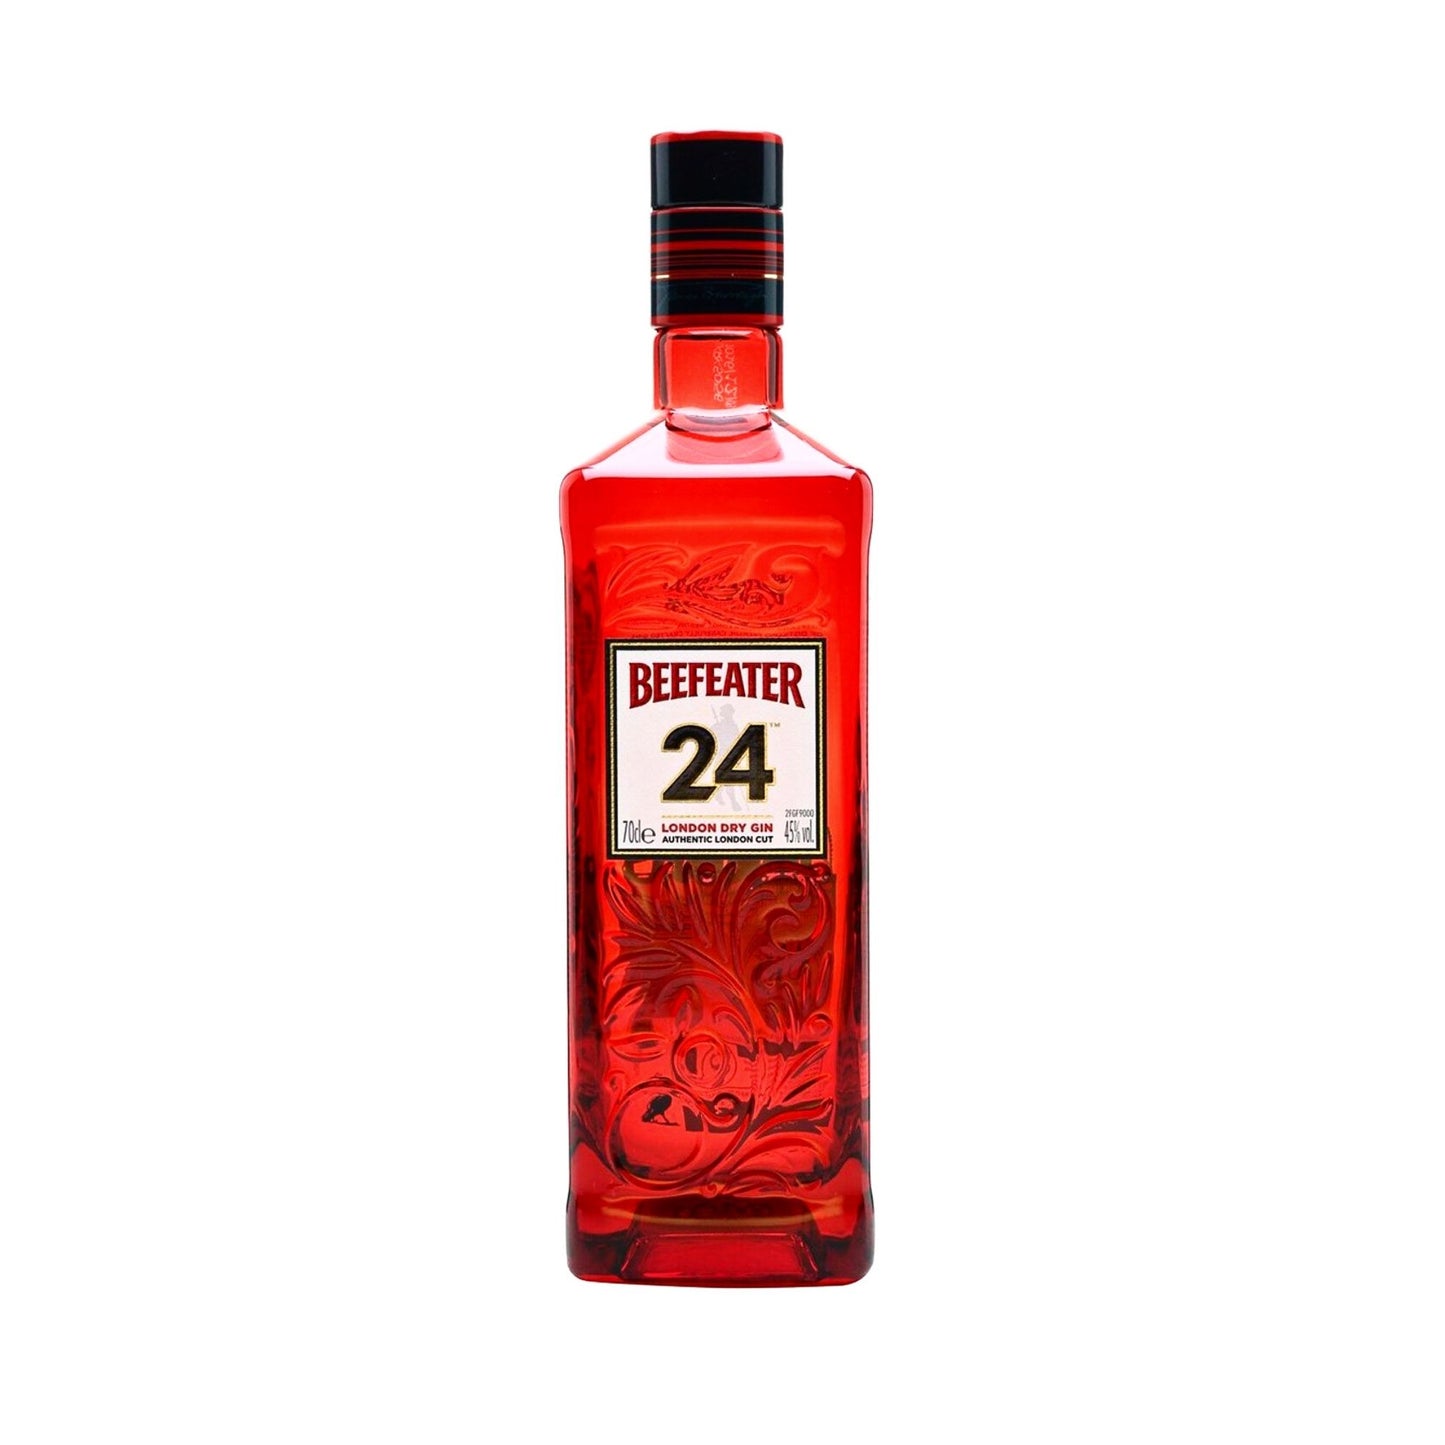 BEEFEATER 24 GIN 0.7LT